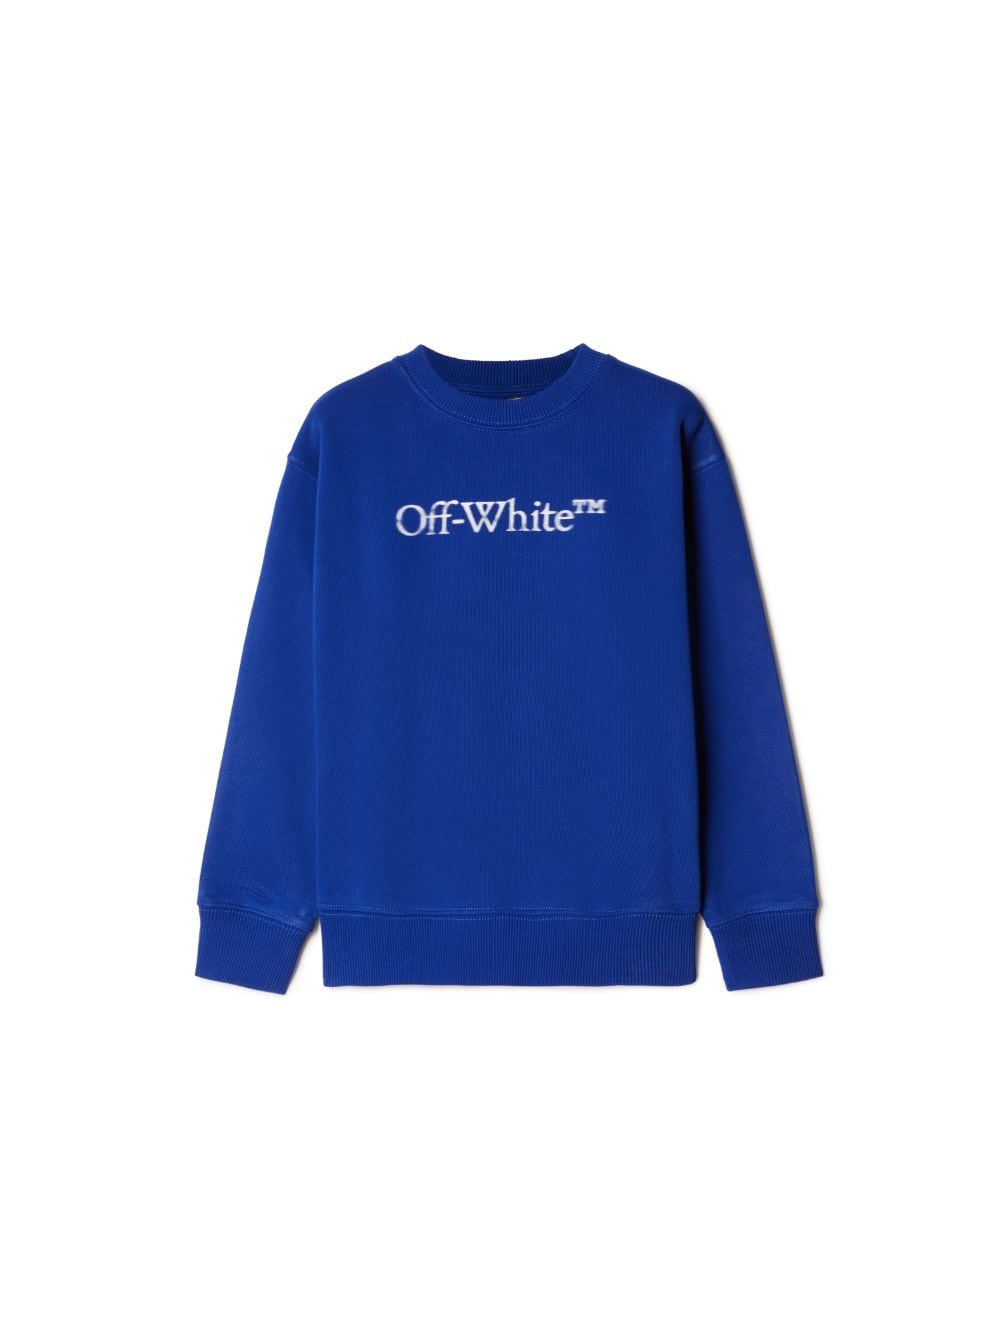 BOOKISH BIT LOGO CREWNECK in blue | Off-White™ Official US